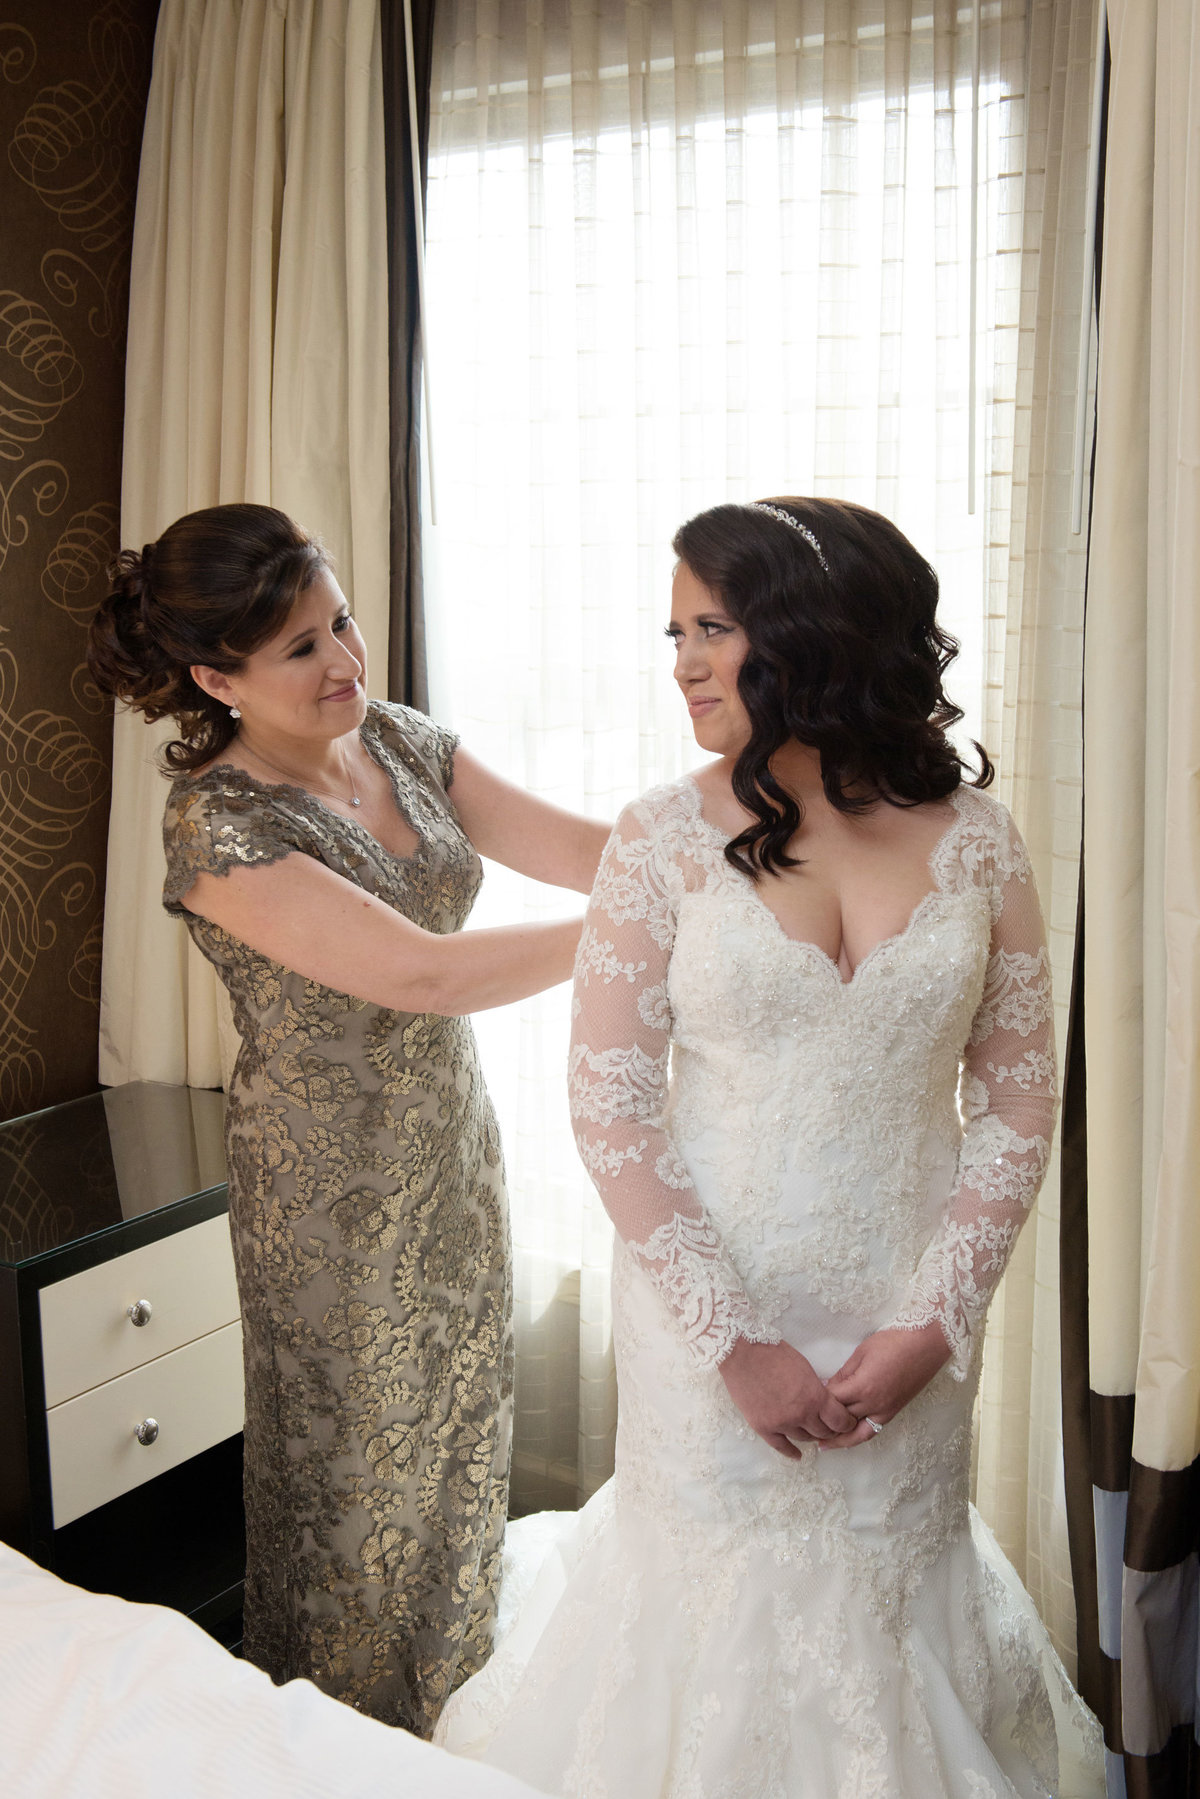 Bride and mother putting on bride's dress at The Inn at Fox Hollow